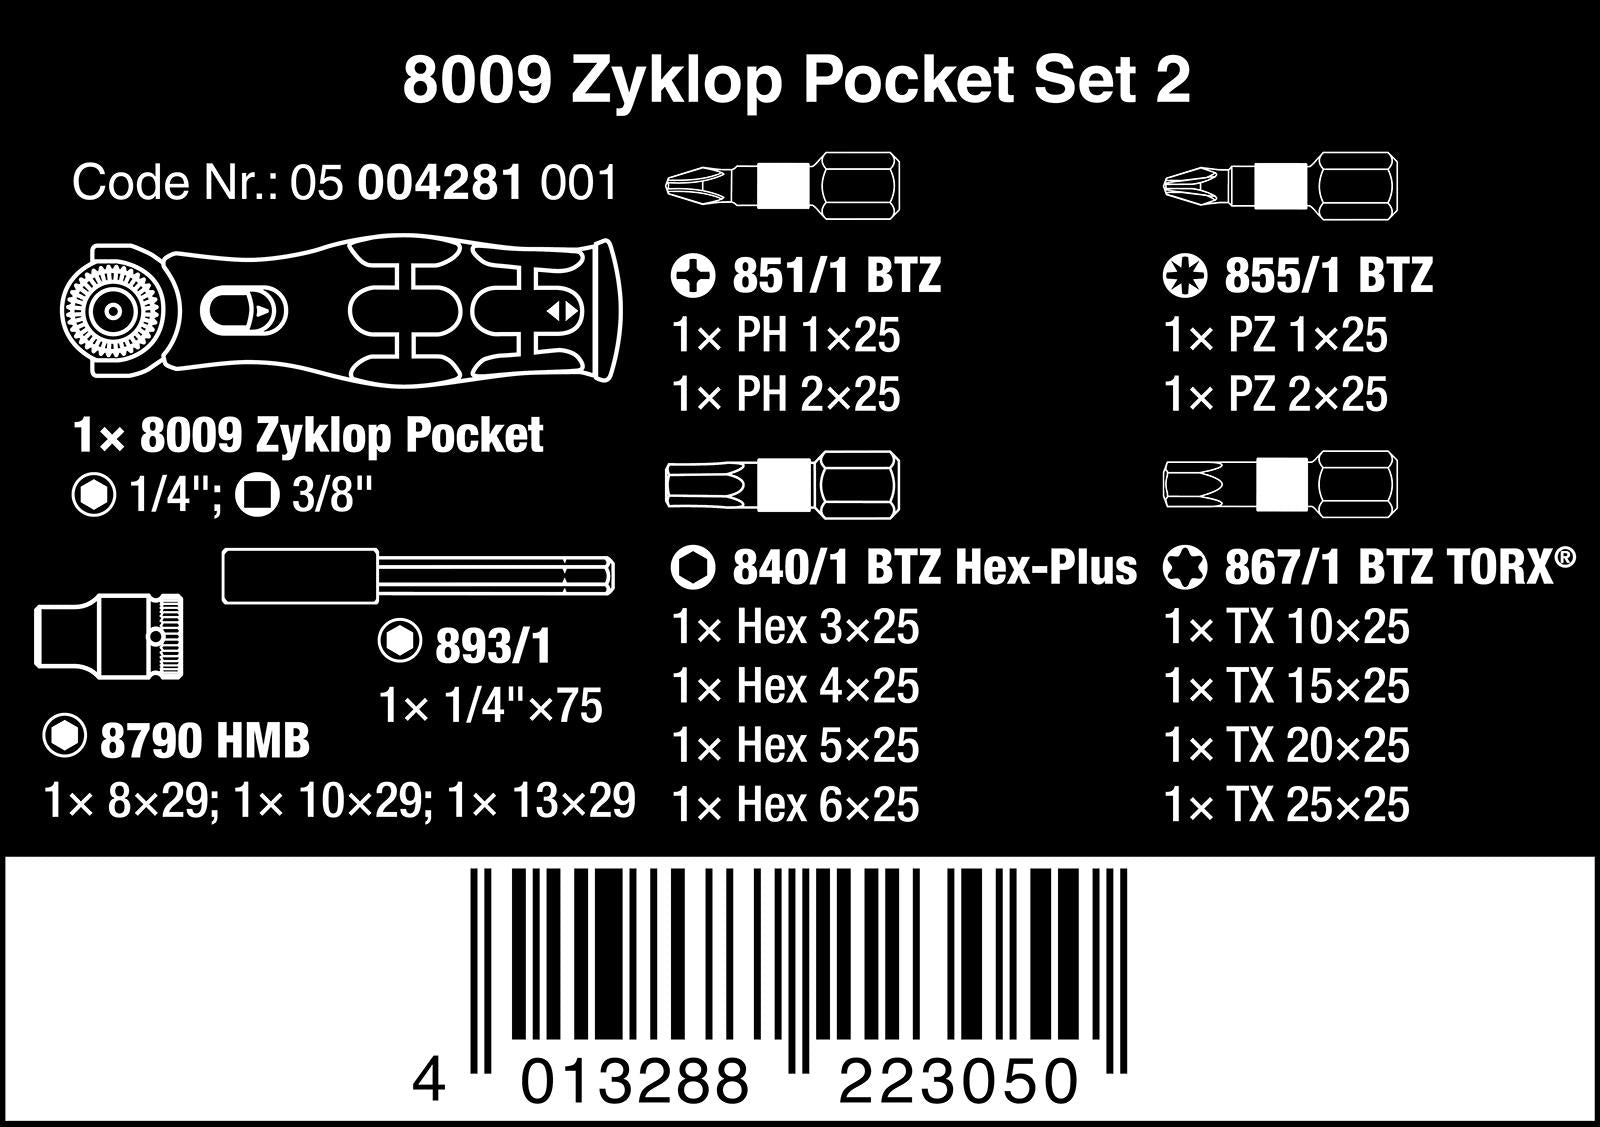 Wera Compact Screwdriver Socket Wrench Zyklop Pocket Set 2 18 Pieces 8009 3/8" Drive 1/4" Hex